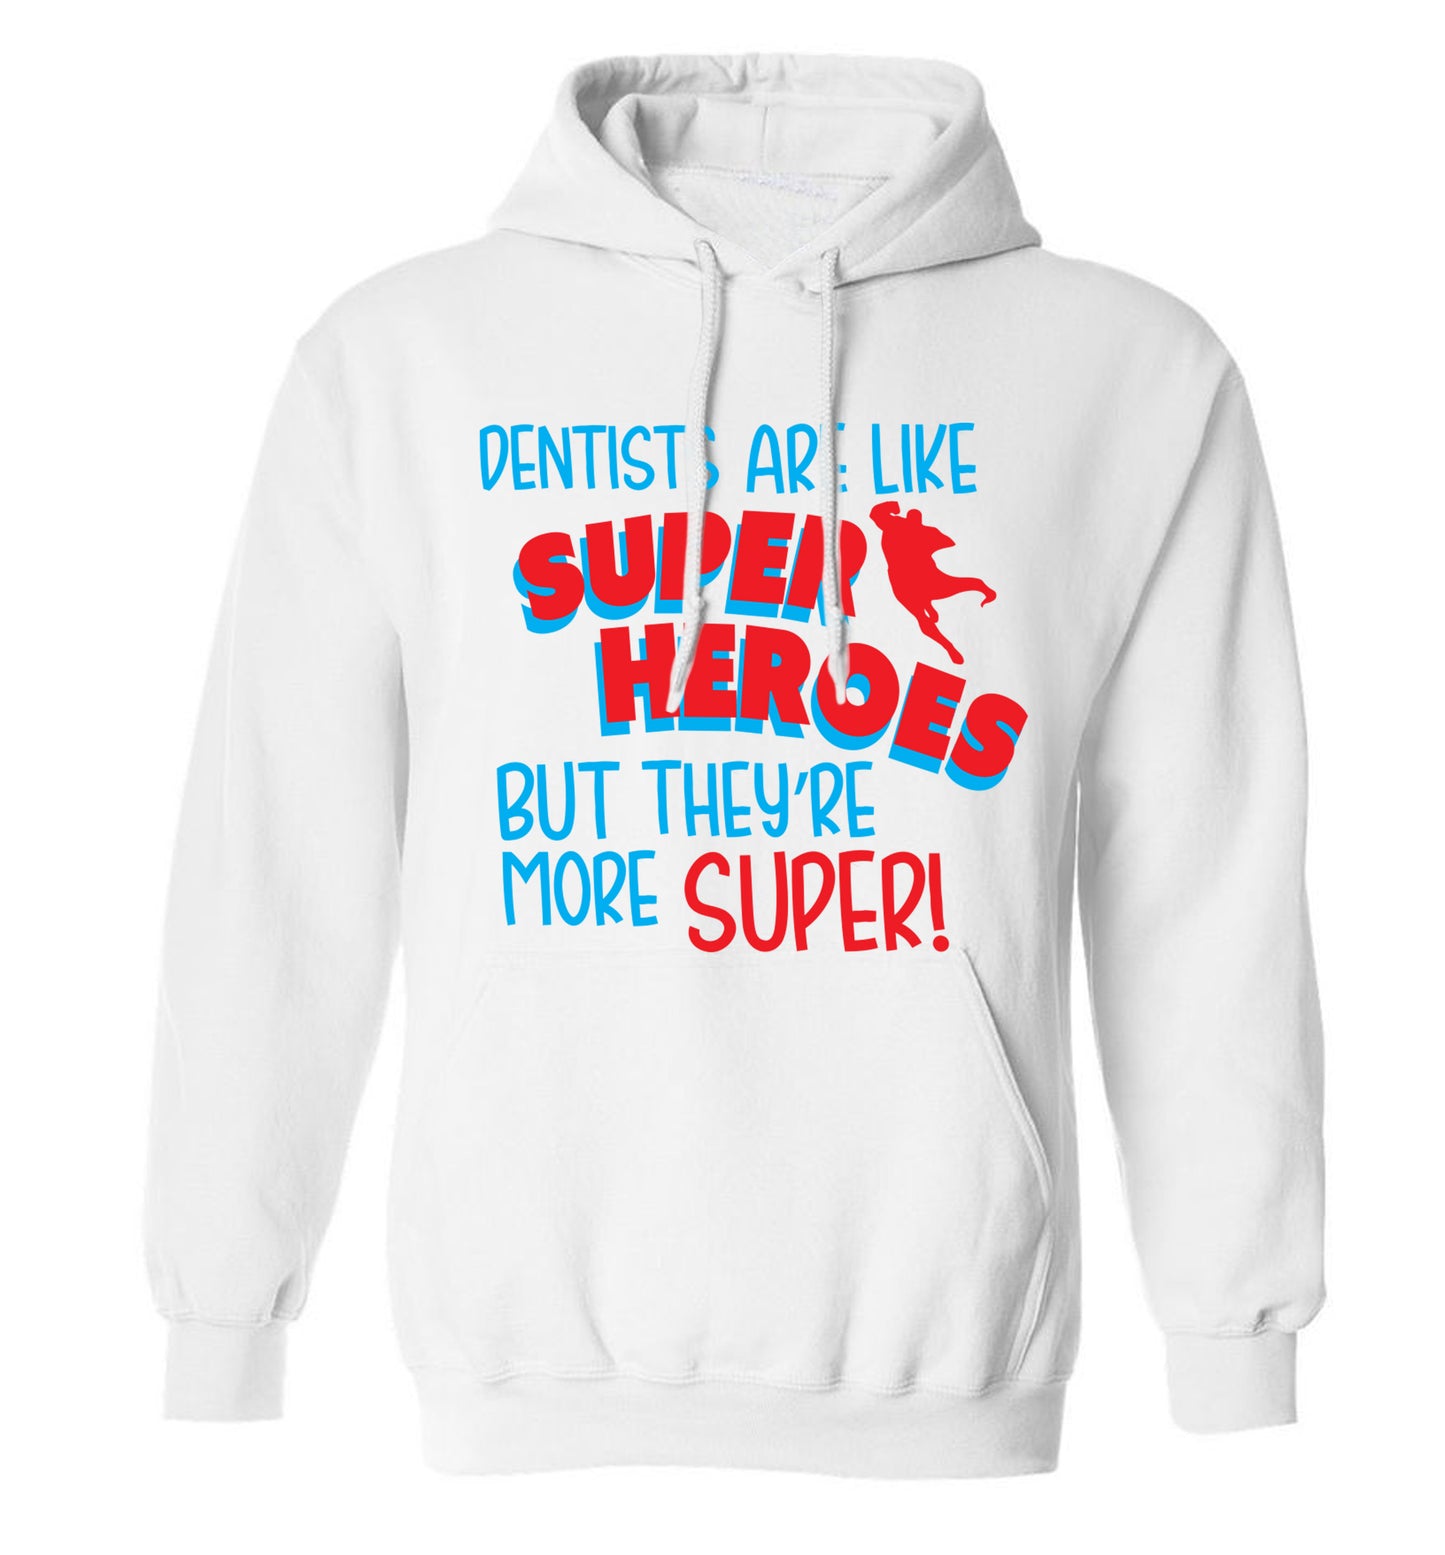 Dentists are like superheros but they're more super adults unisex white hoodie 2XL